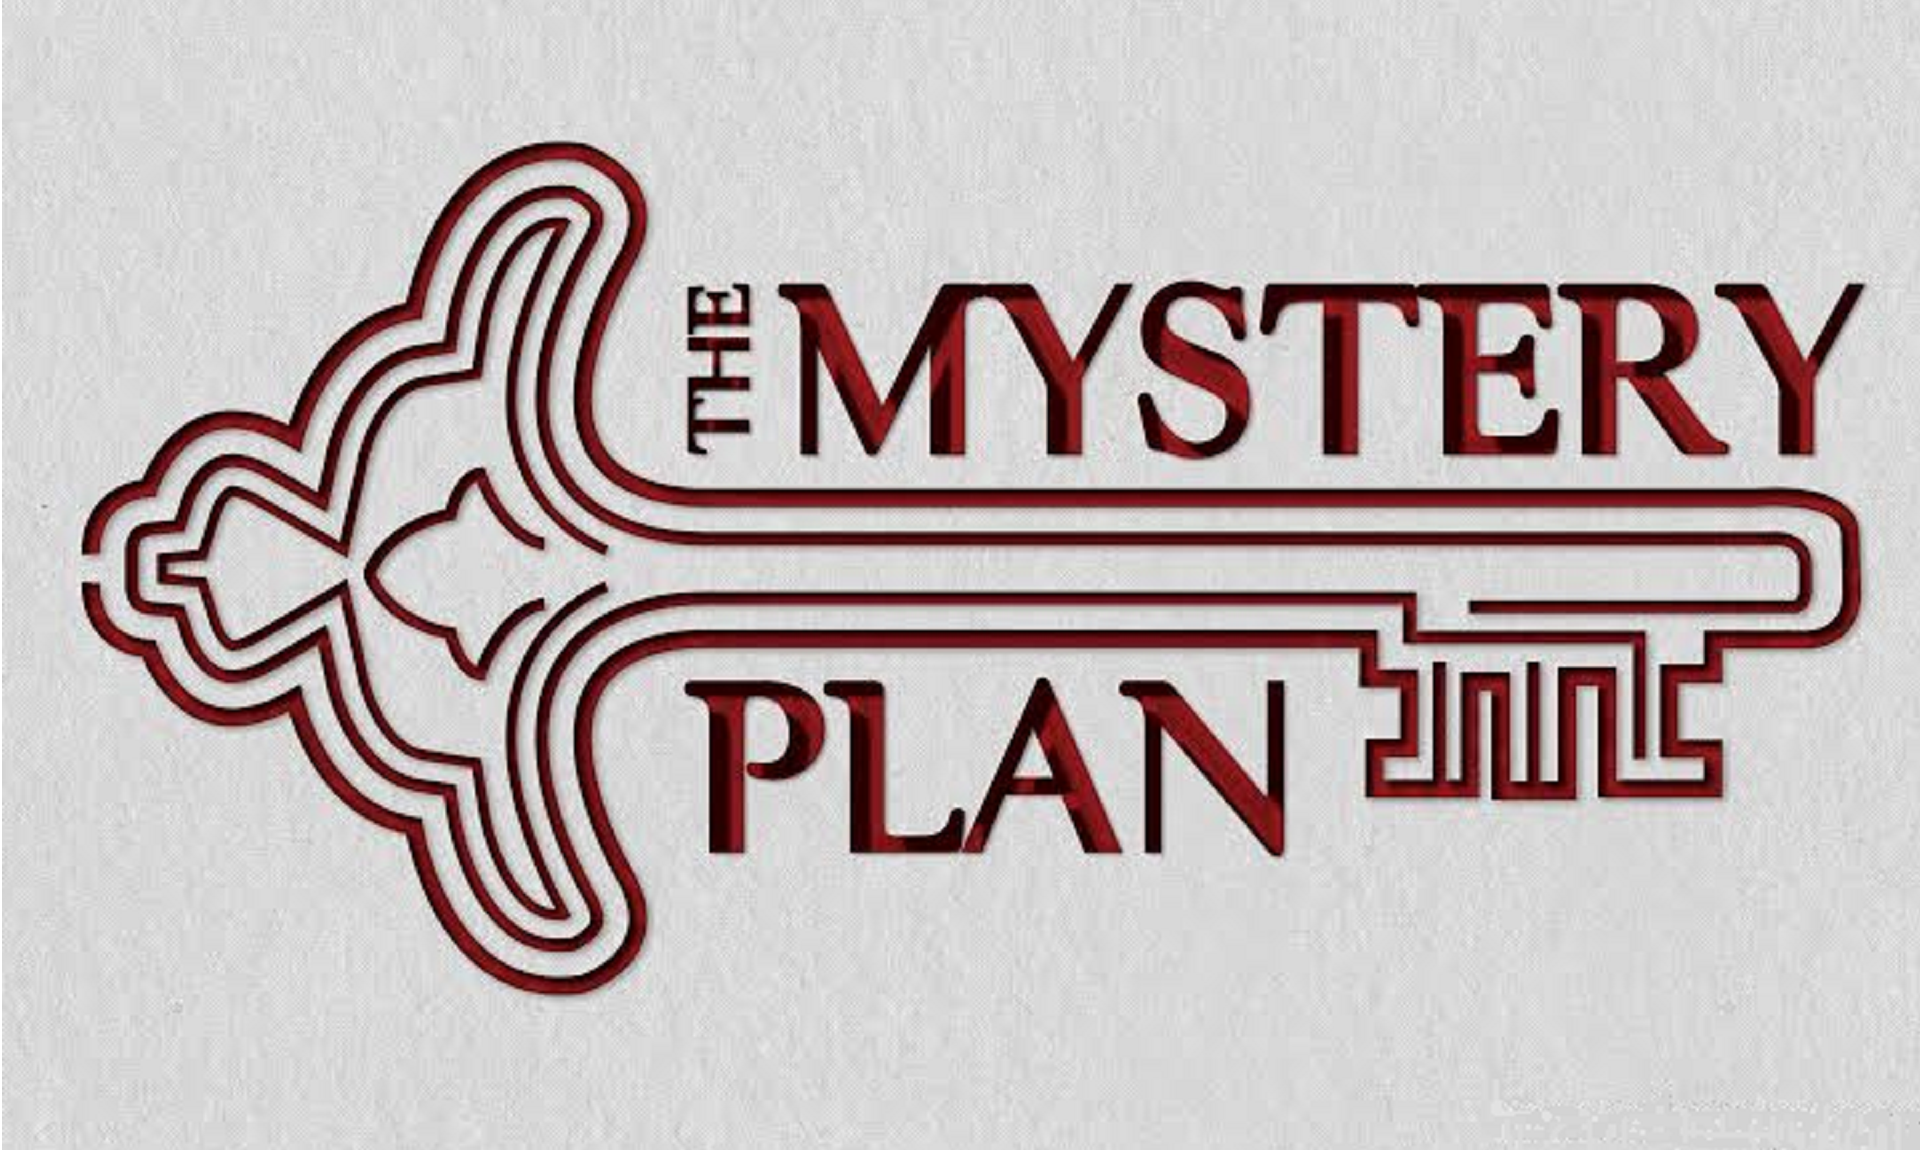 The Mystery Plan